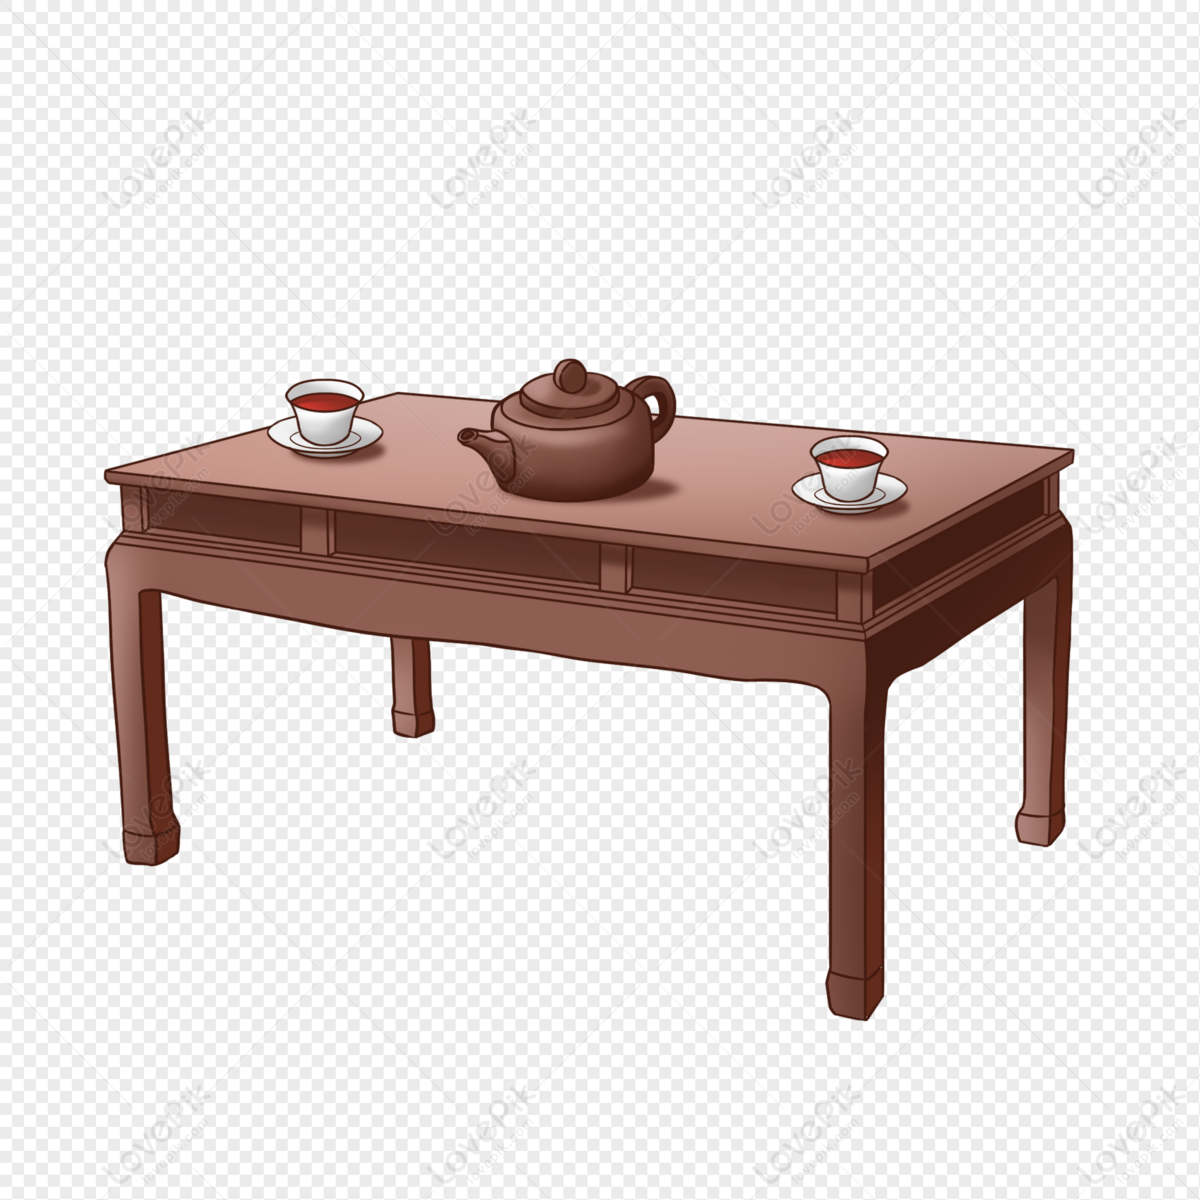 Chinese Table Tea Set Png Transparent Background And Clipart Image For Free  Download - Lovepik | 401201350